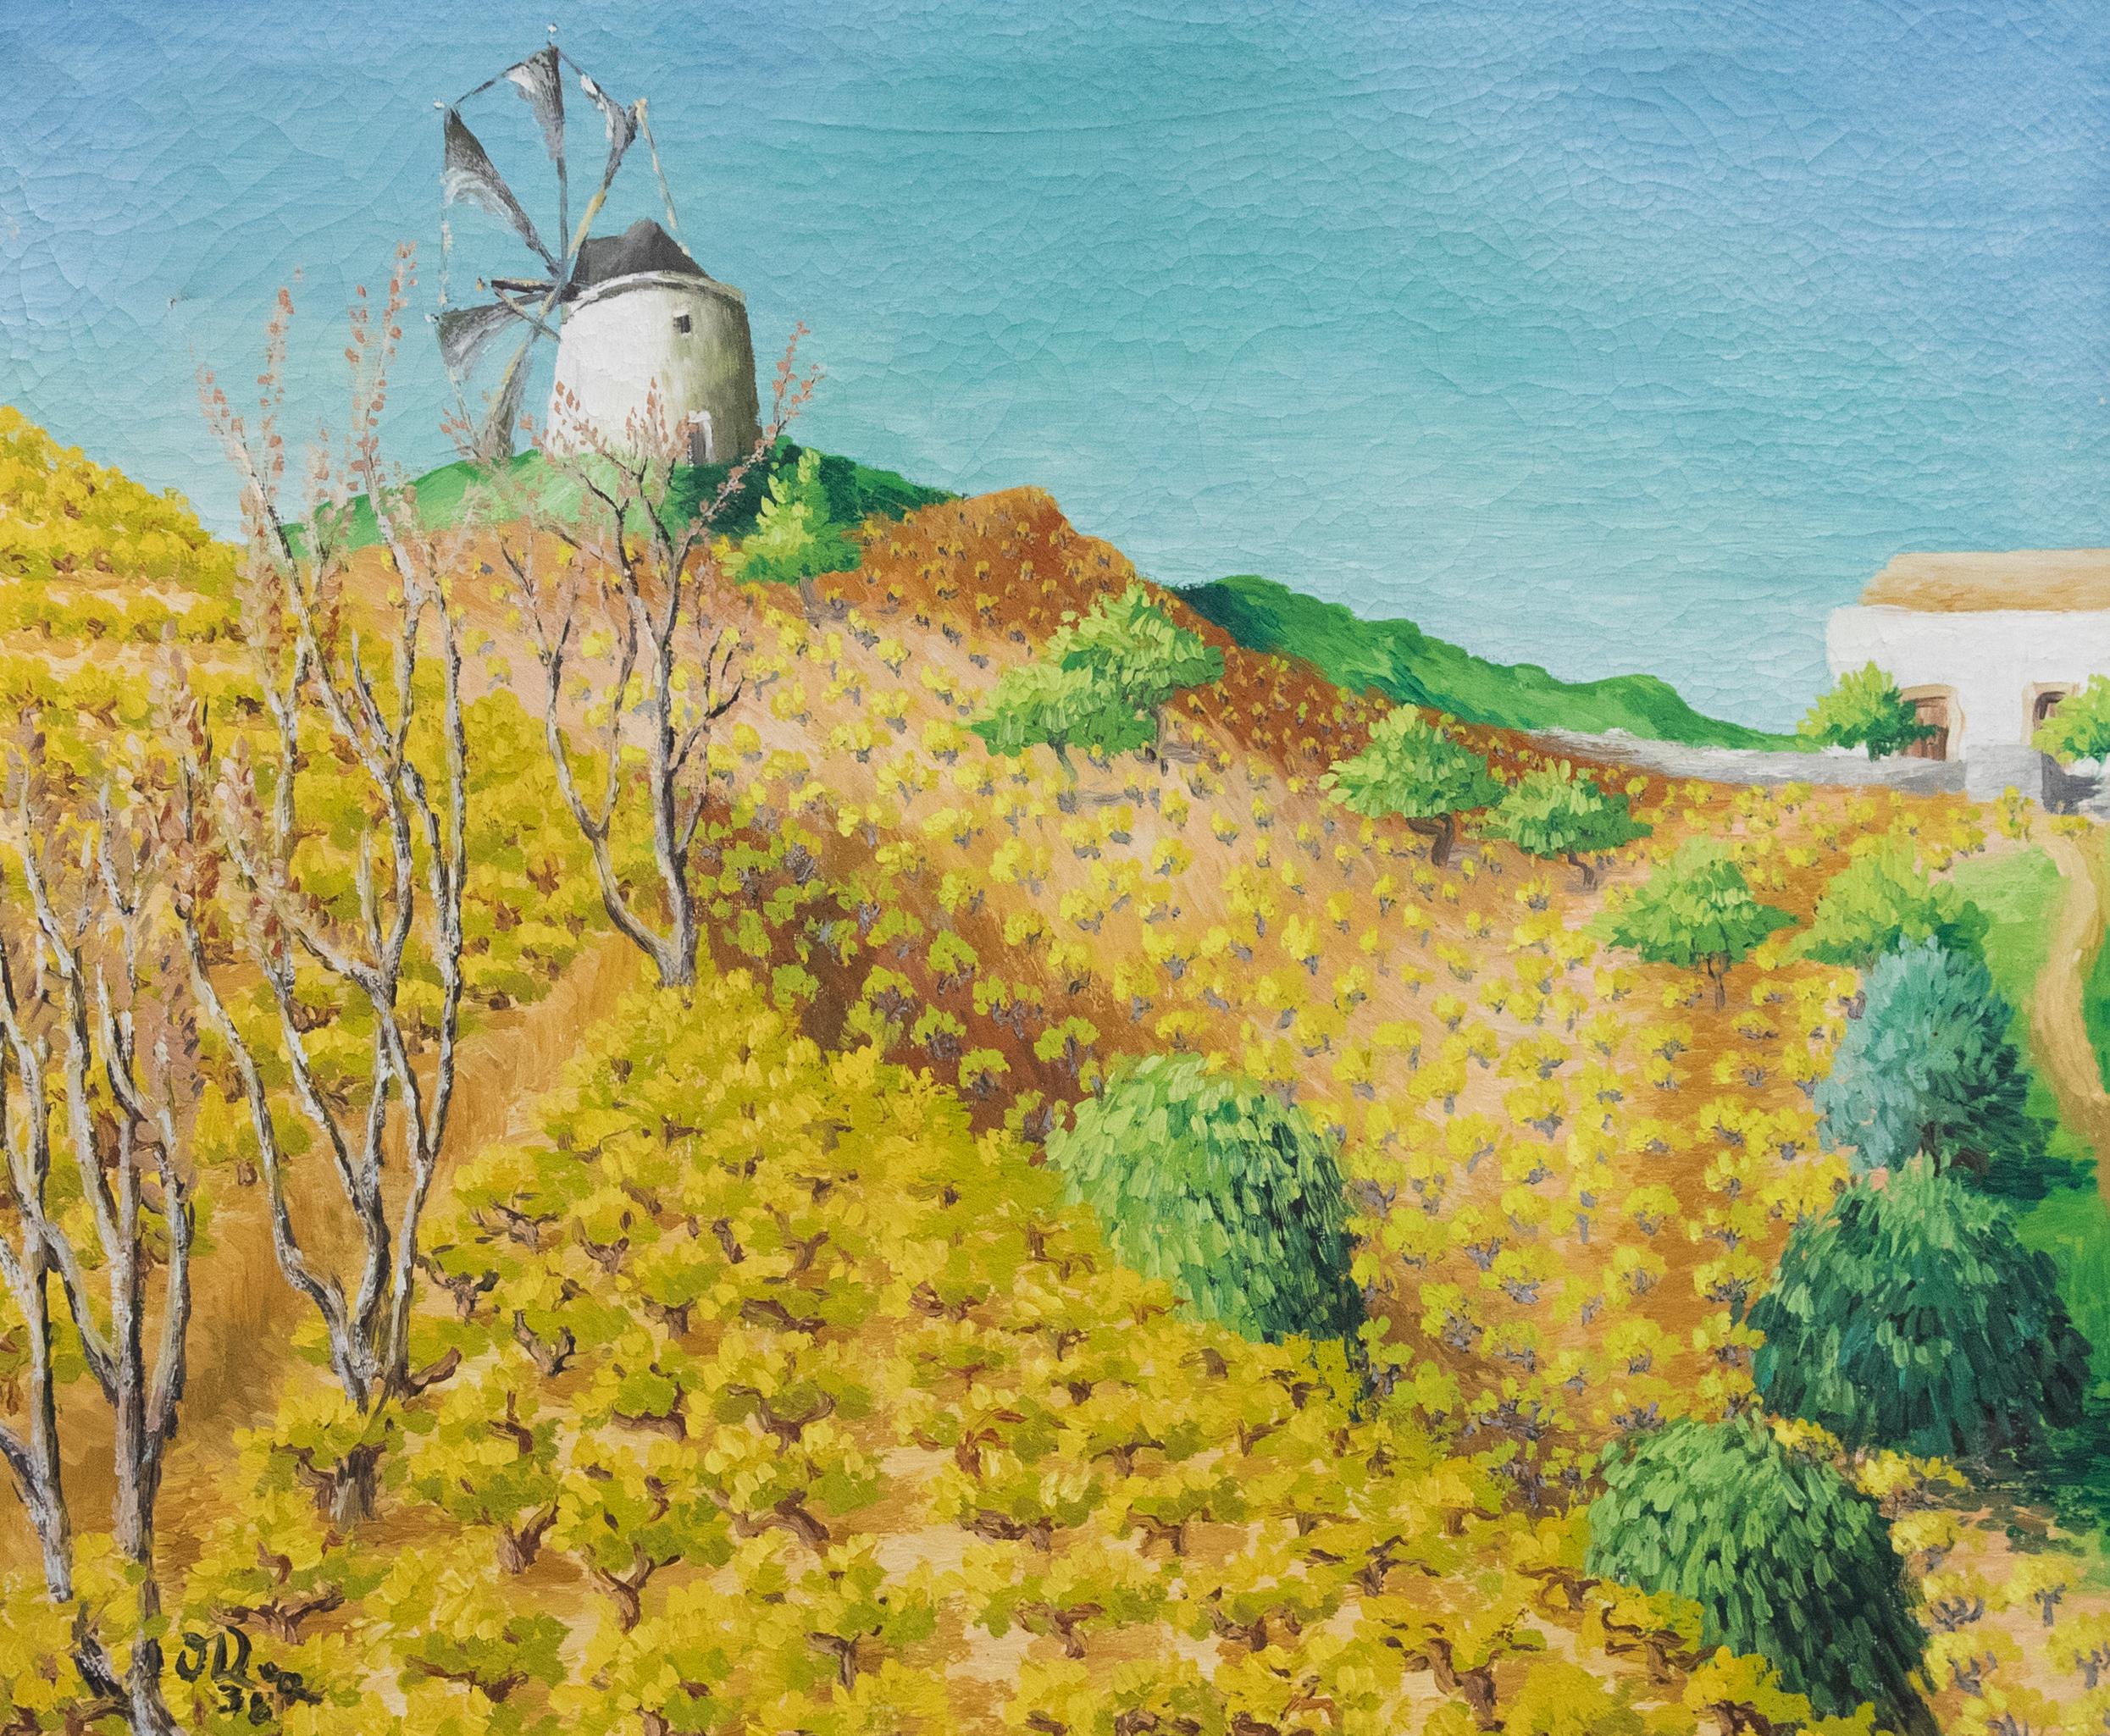 A vibrant post-impressionist scene of a winery and vineyard in the rolling hills of Sesimbra, Portugal. Pictured high above rows of trained vines, a windmill stands prominent against blue skies. Signed and dated to the lower left. With the title and